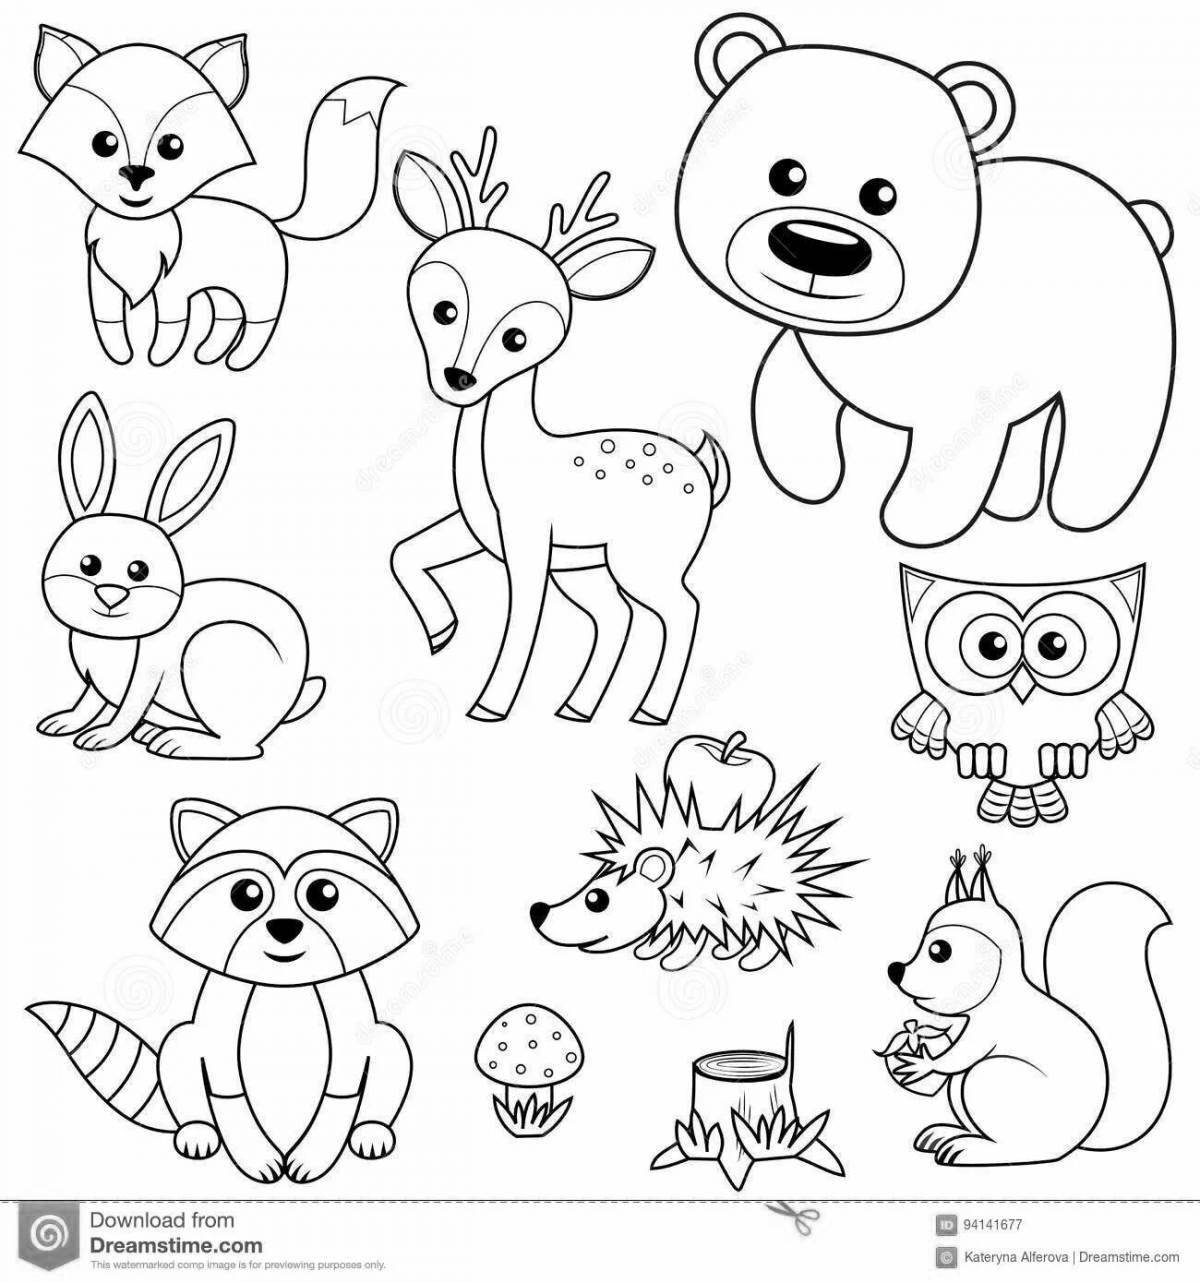 Awesome forest animals coloring page for 6-7 year olds